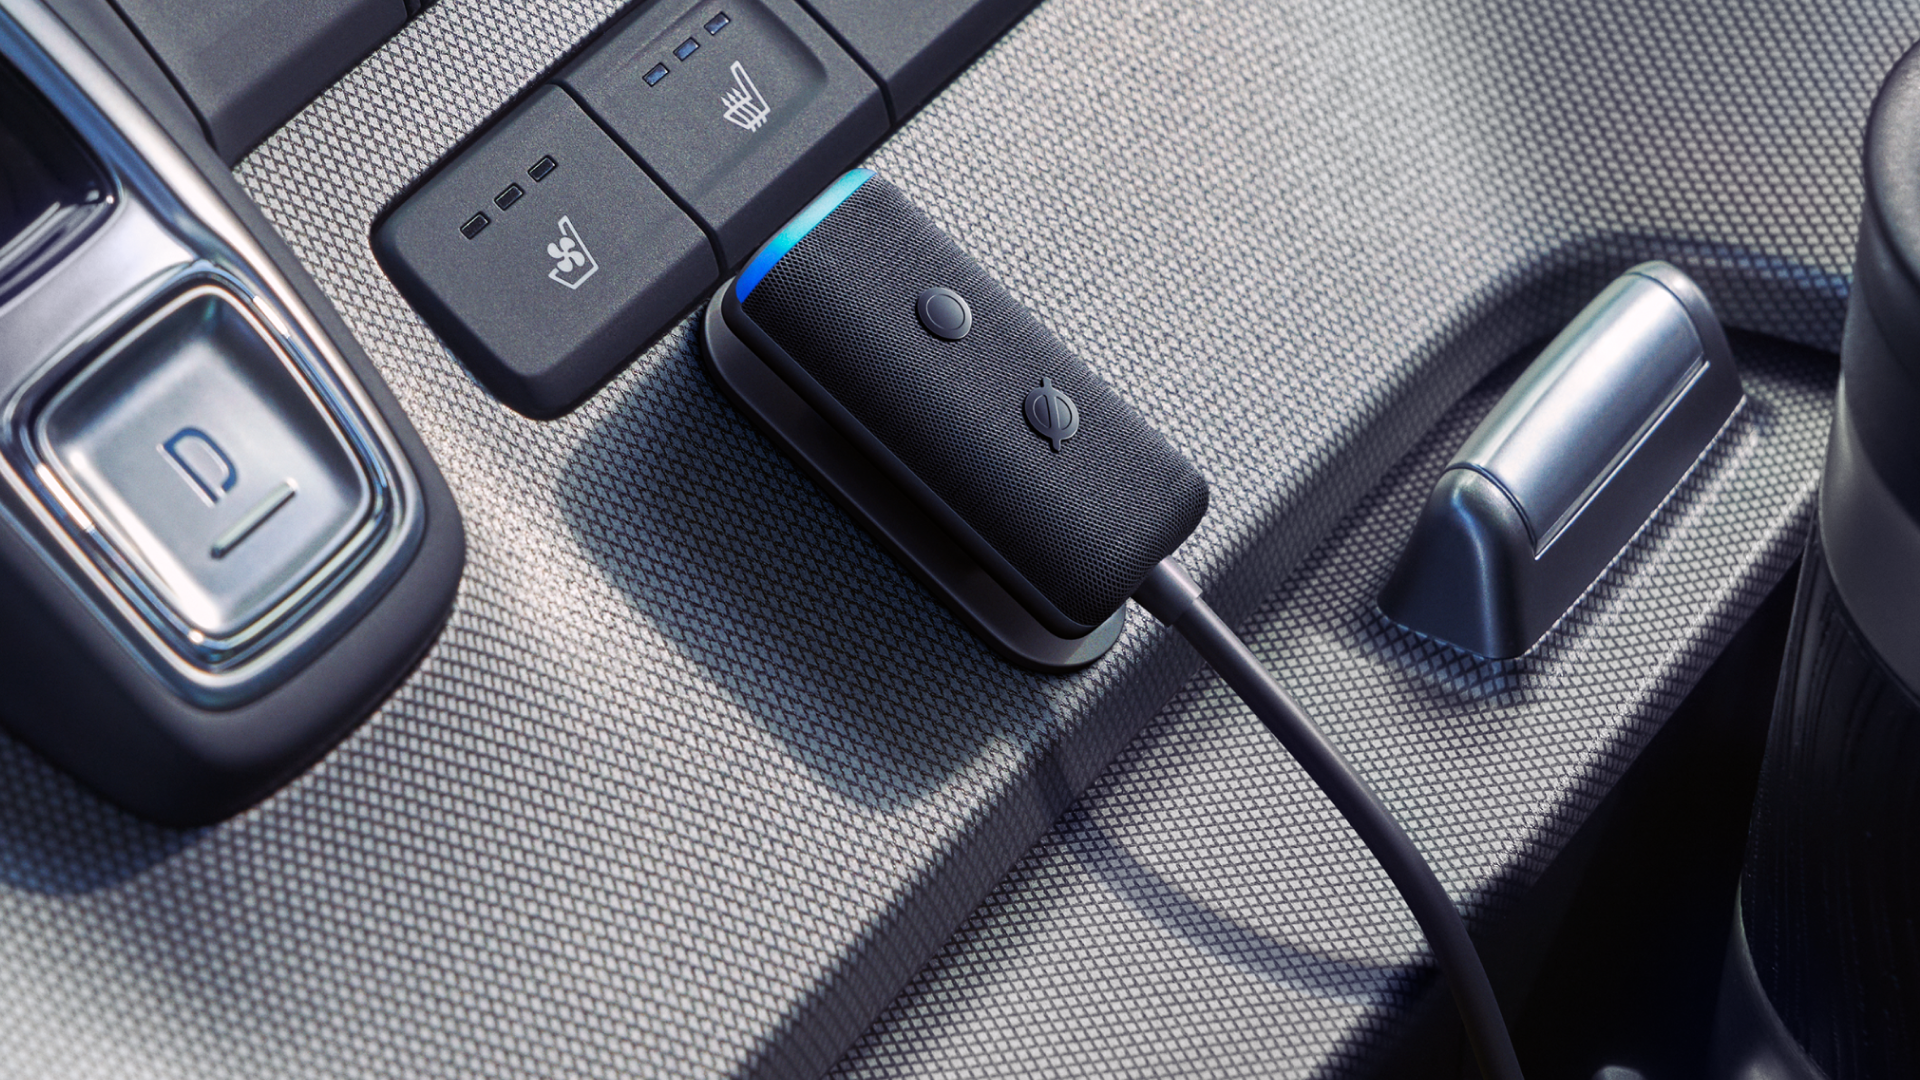 An Amazon Echo Auto mounted to the center console of a car, just below buttons for seat heater controls.